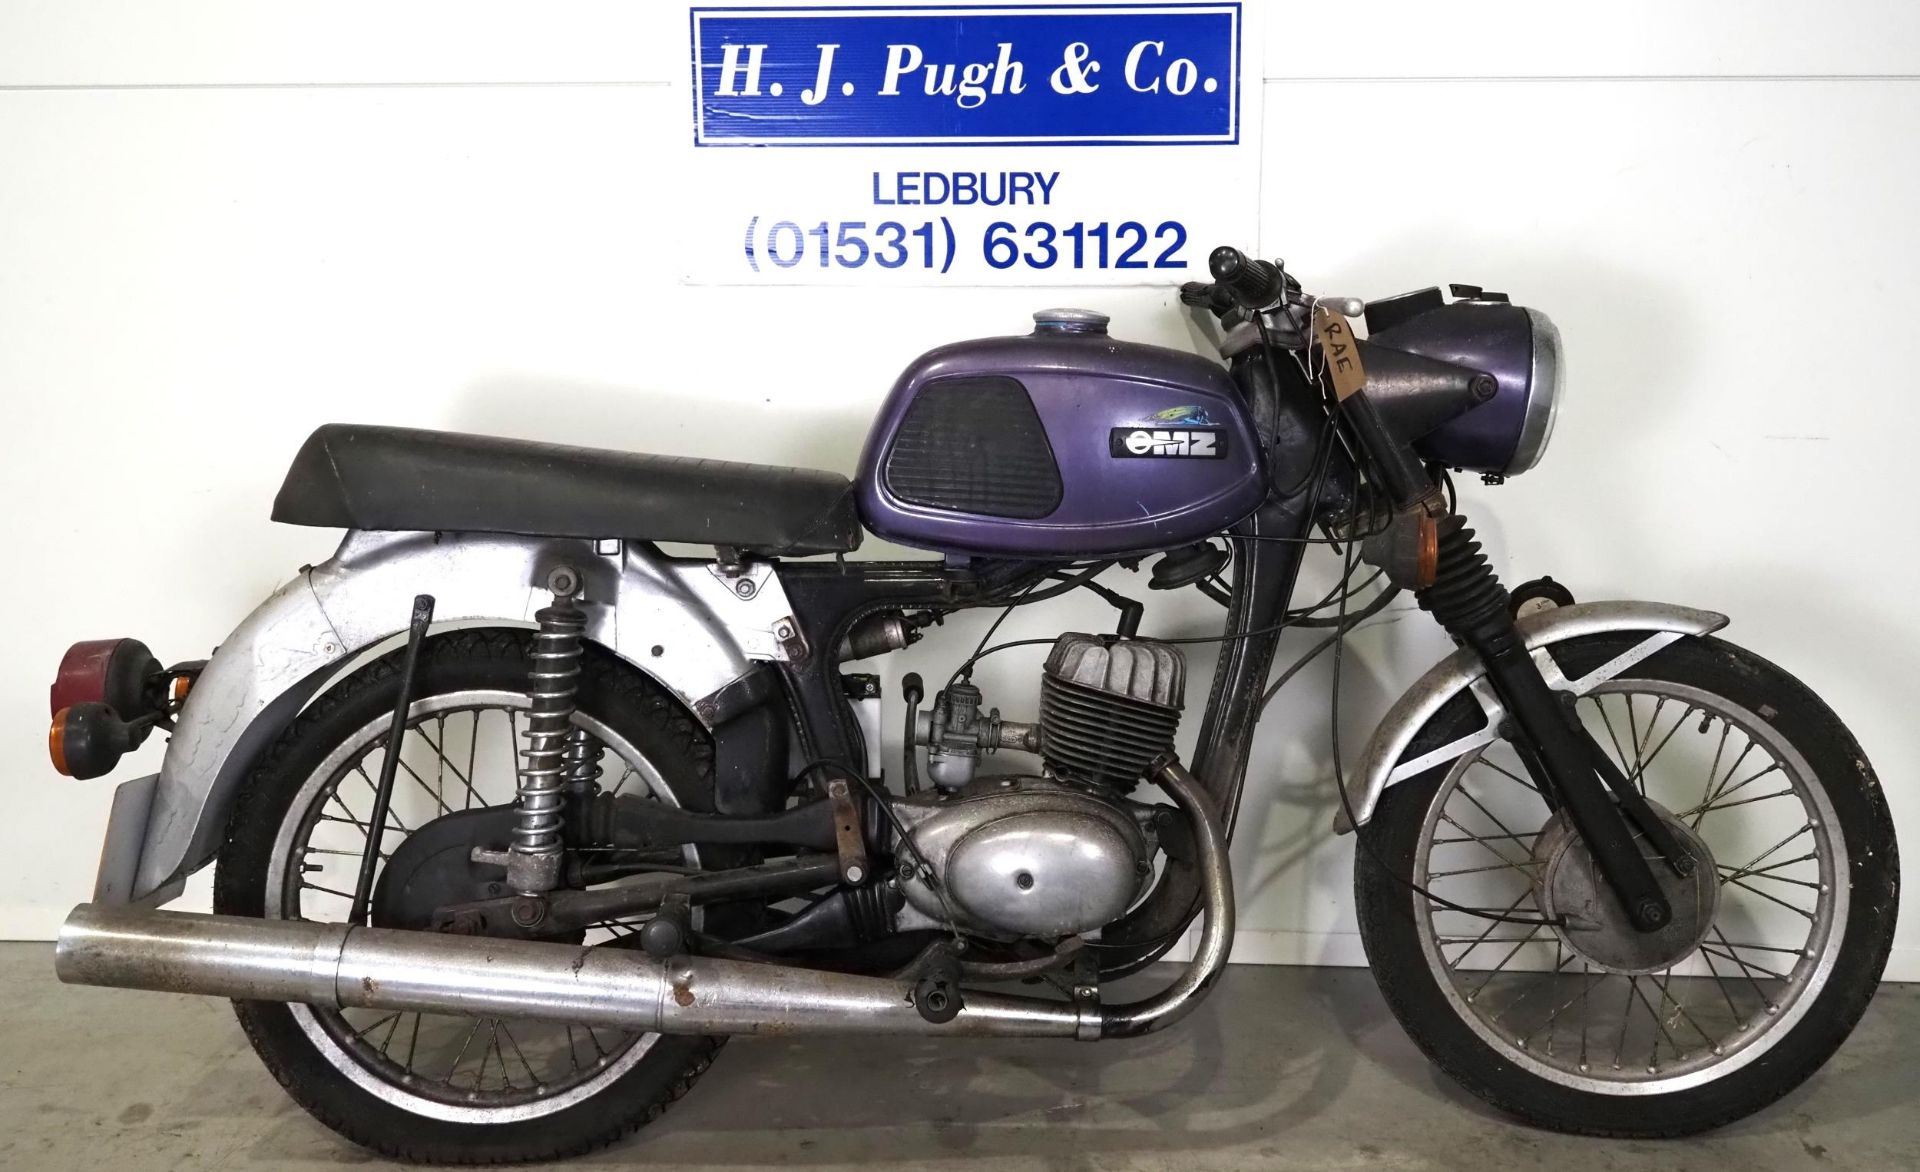 MZ motorcycle. 1986. 125cc. Frame No. 8861678 as stated on V5 Engine No. 7504877 Property of a